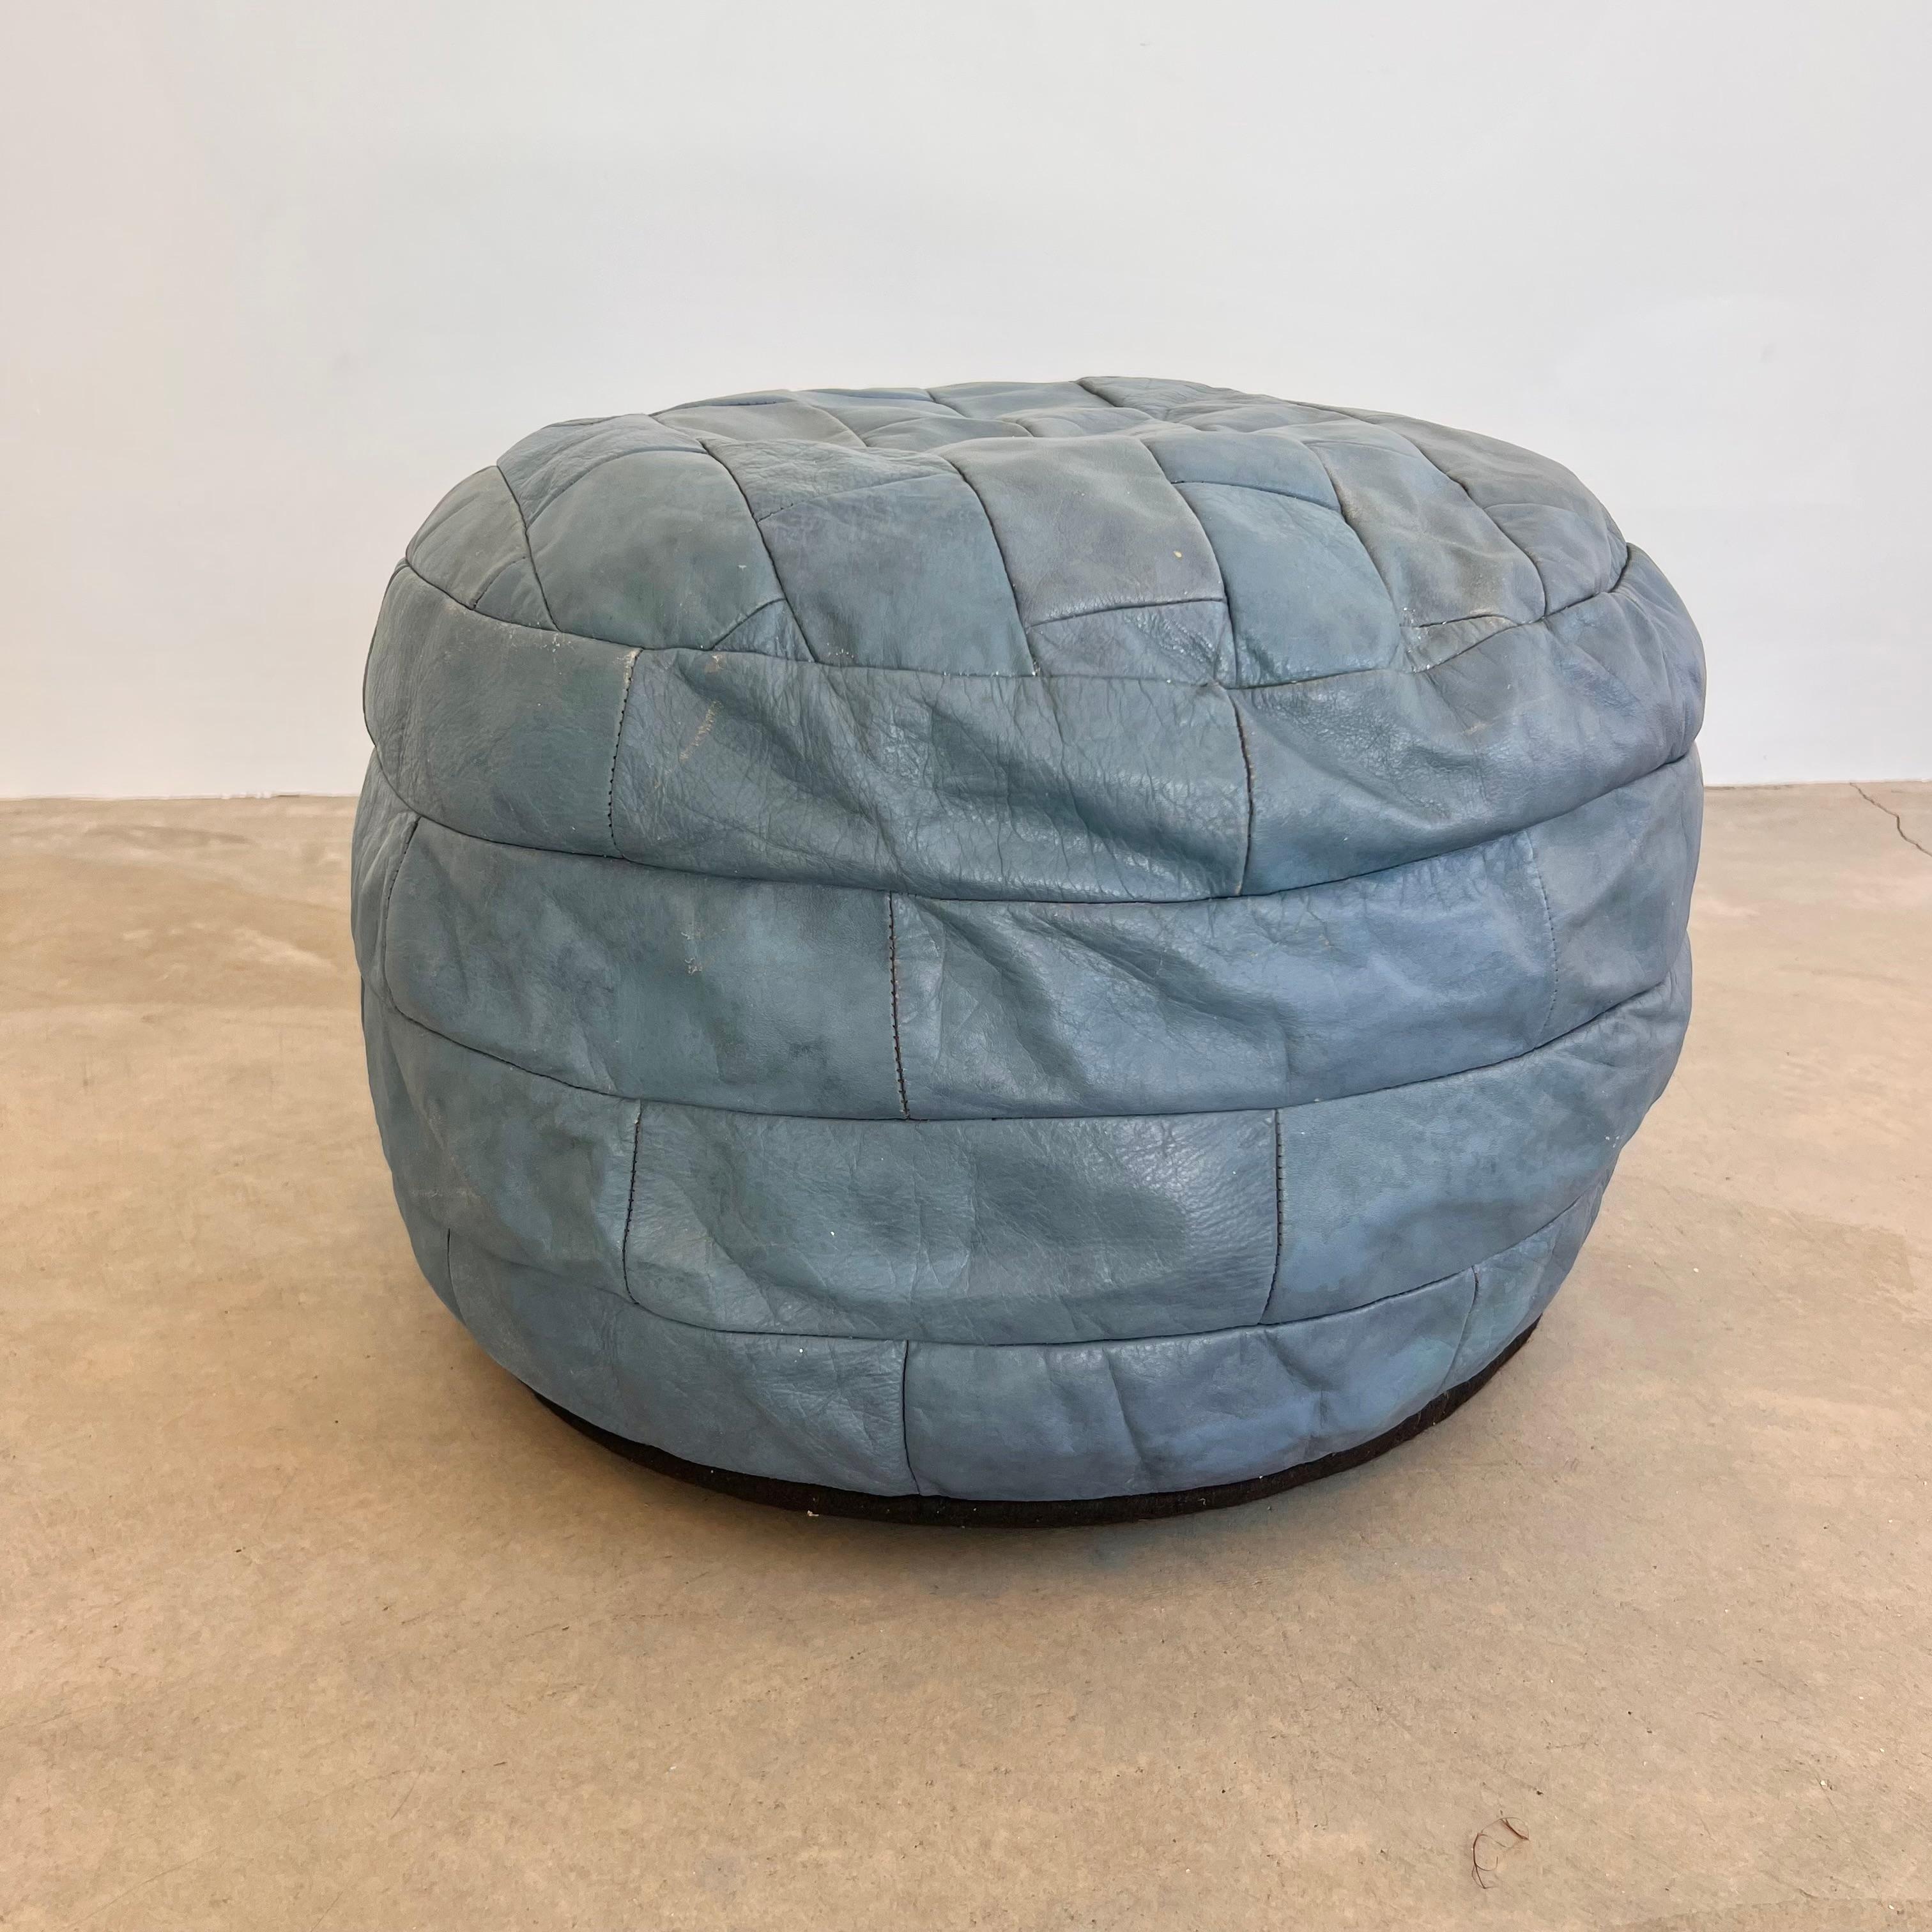 Wonderful slate blue leather pouf/ottoman by Swiss designer De Sede with square patchwork. Handmade with wonderful faded patina or varying hues of blues and greys. Gorgeous accent piece. Good vintage condition. Wear appropriate with age. Brand new